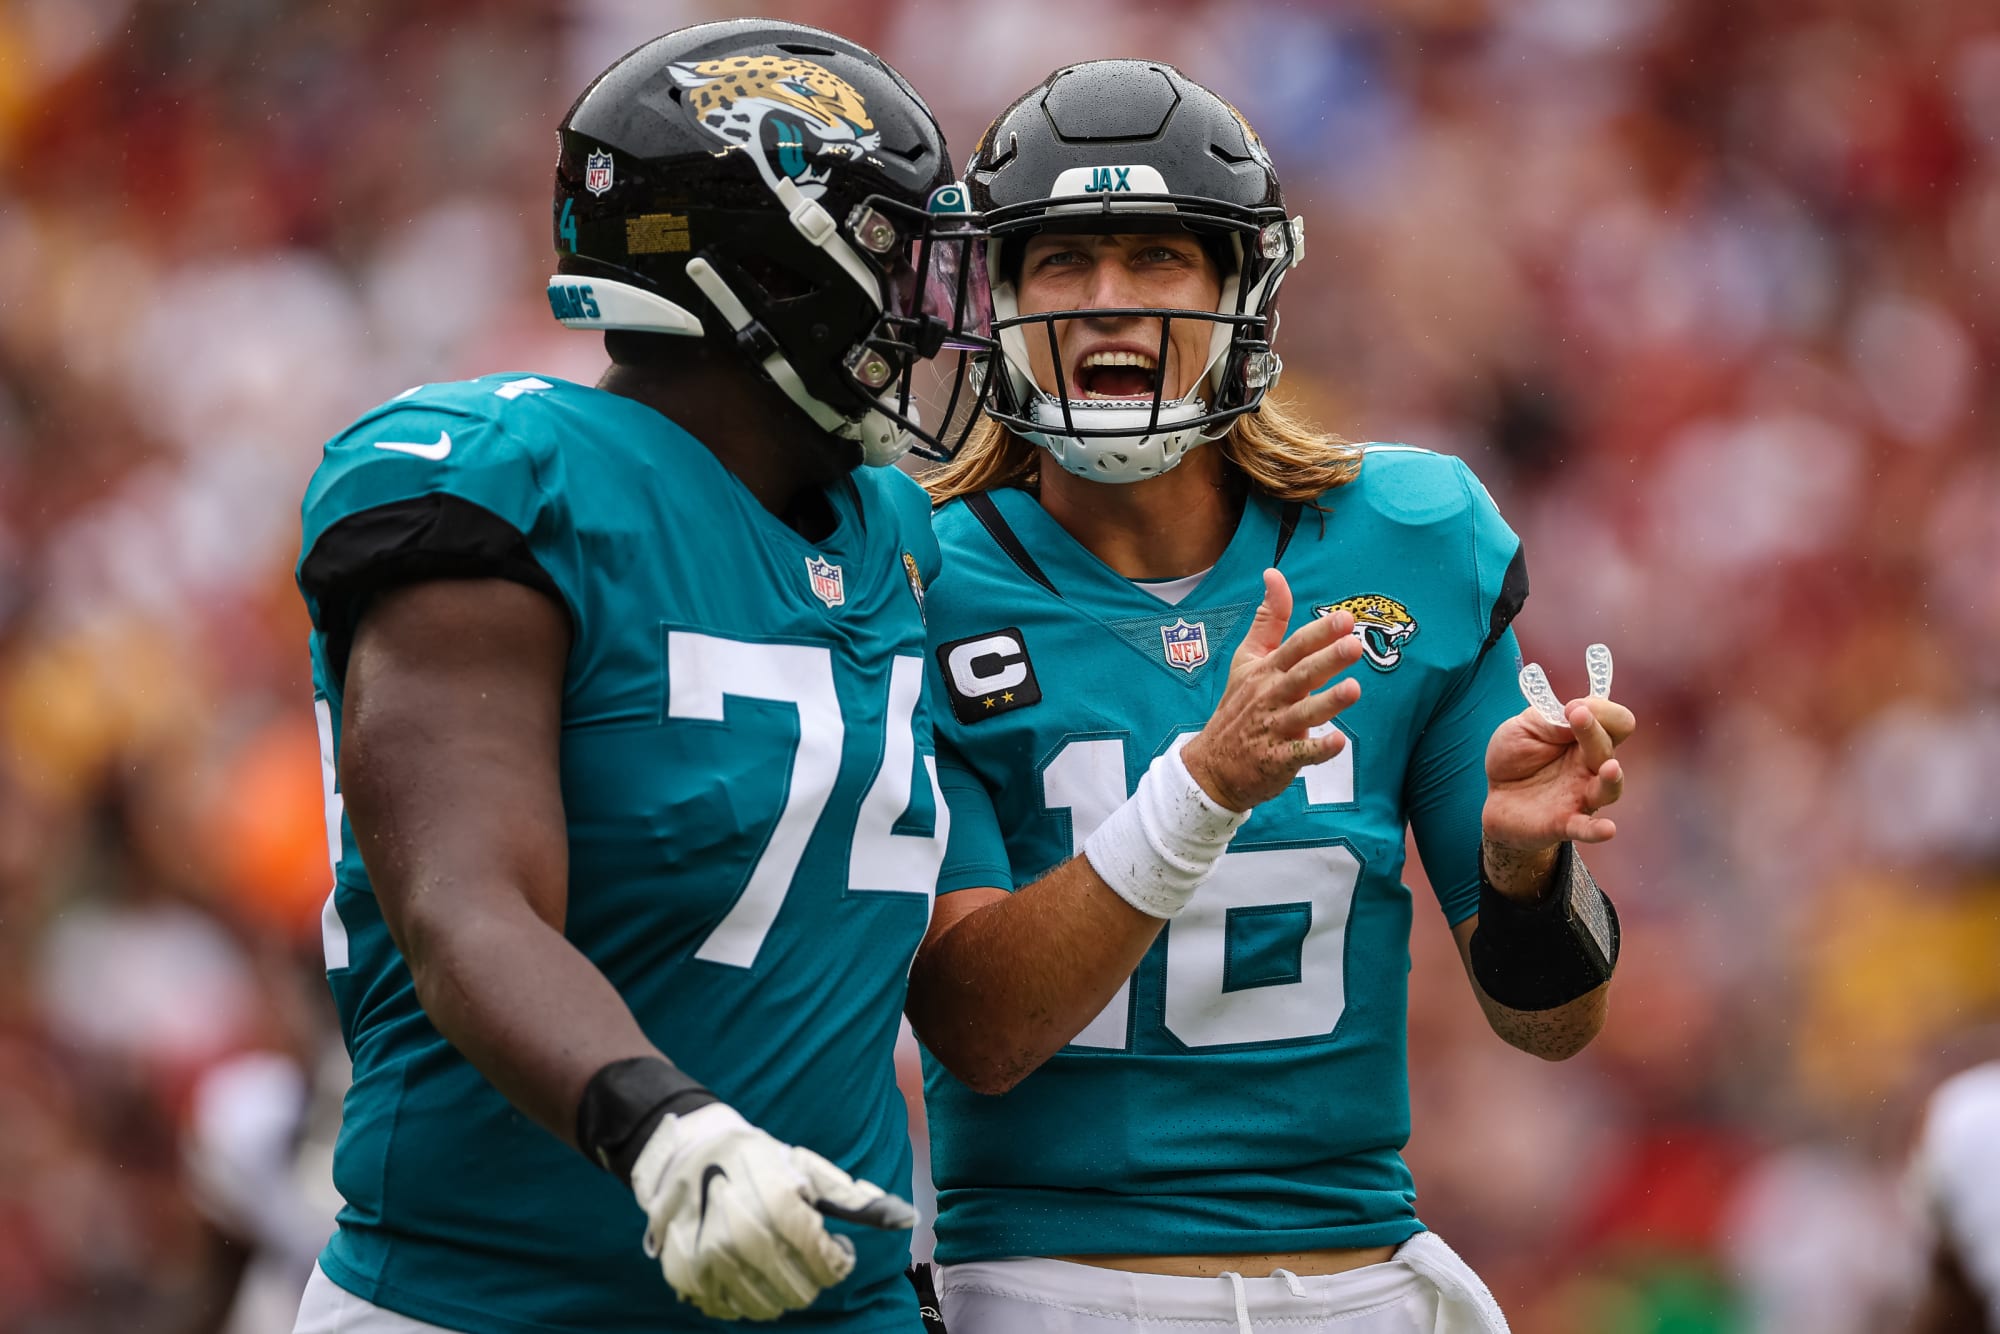 Jaguars move up several spots in Power Rankings following win vs. Colts